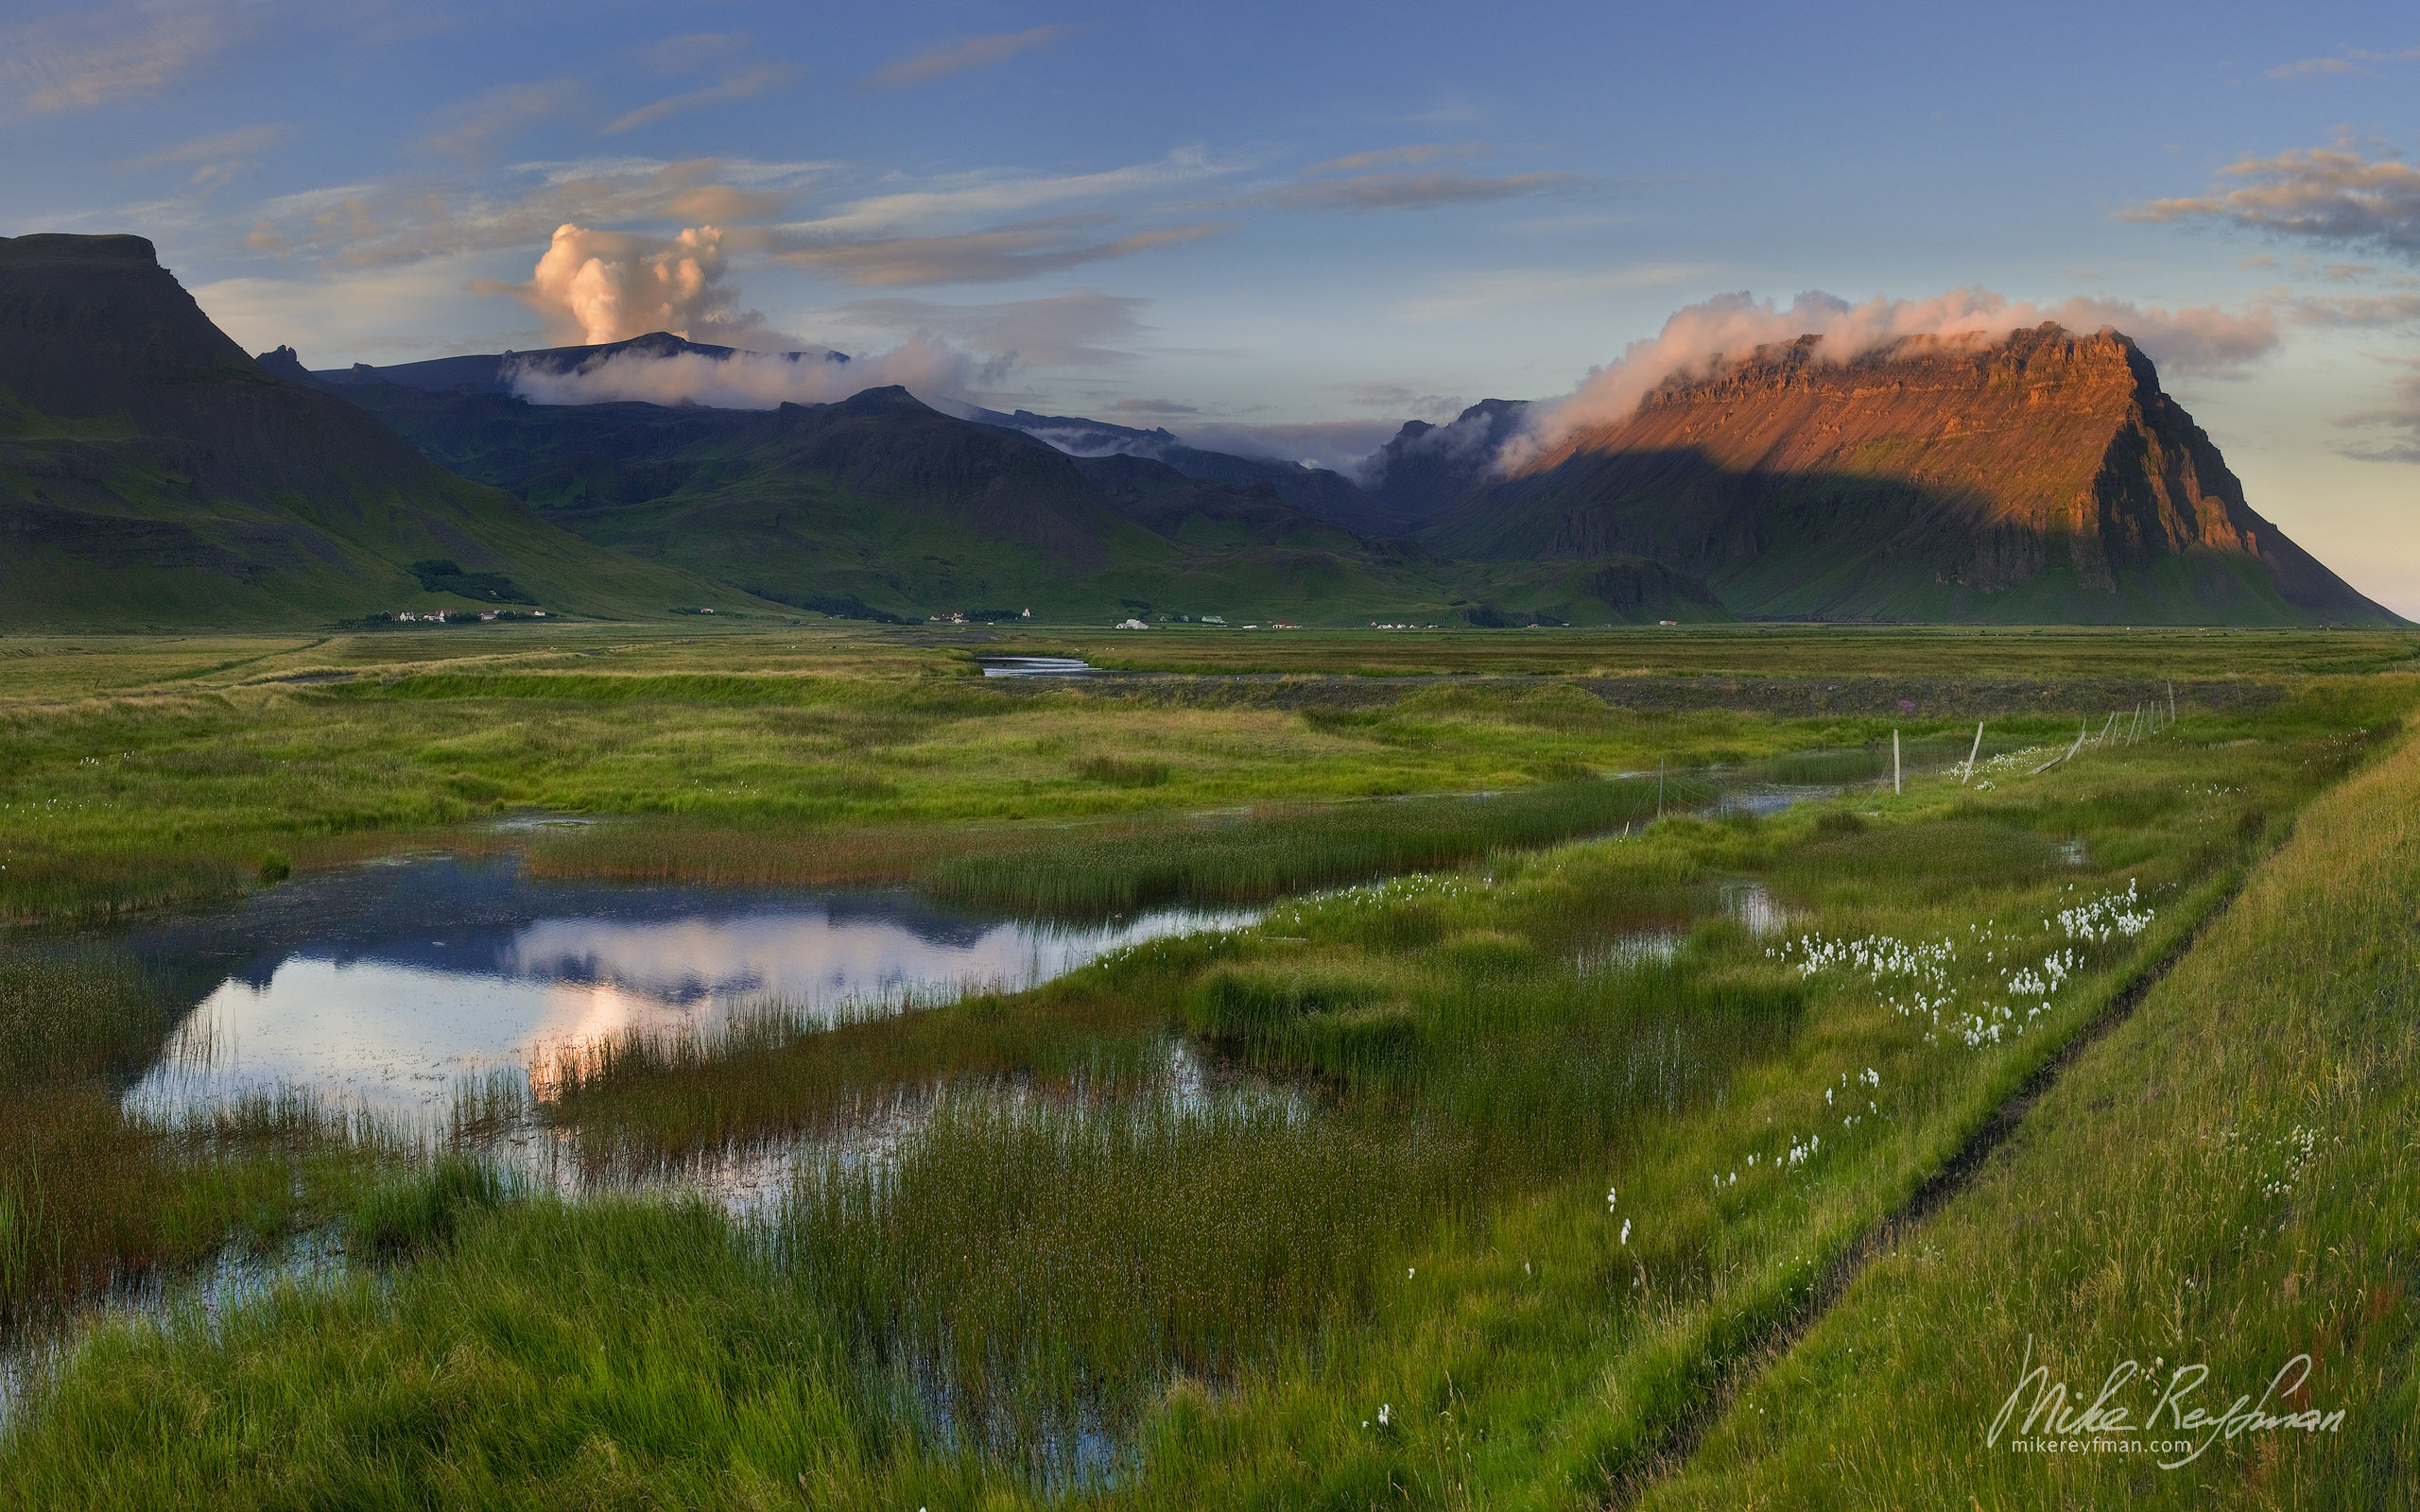 Eyjafjallajokull Volcano and Cotton Grass. South Iceland 035-IC-GP _O3X2749-52 - Rhyolite Mountains, Crater Lakes, Geothermal Areas, Lava Fields and Glacial Rivers. Iceland.  - Mike Reyfman Photography